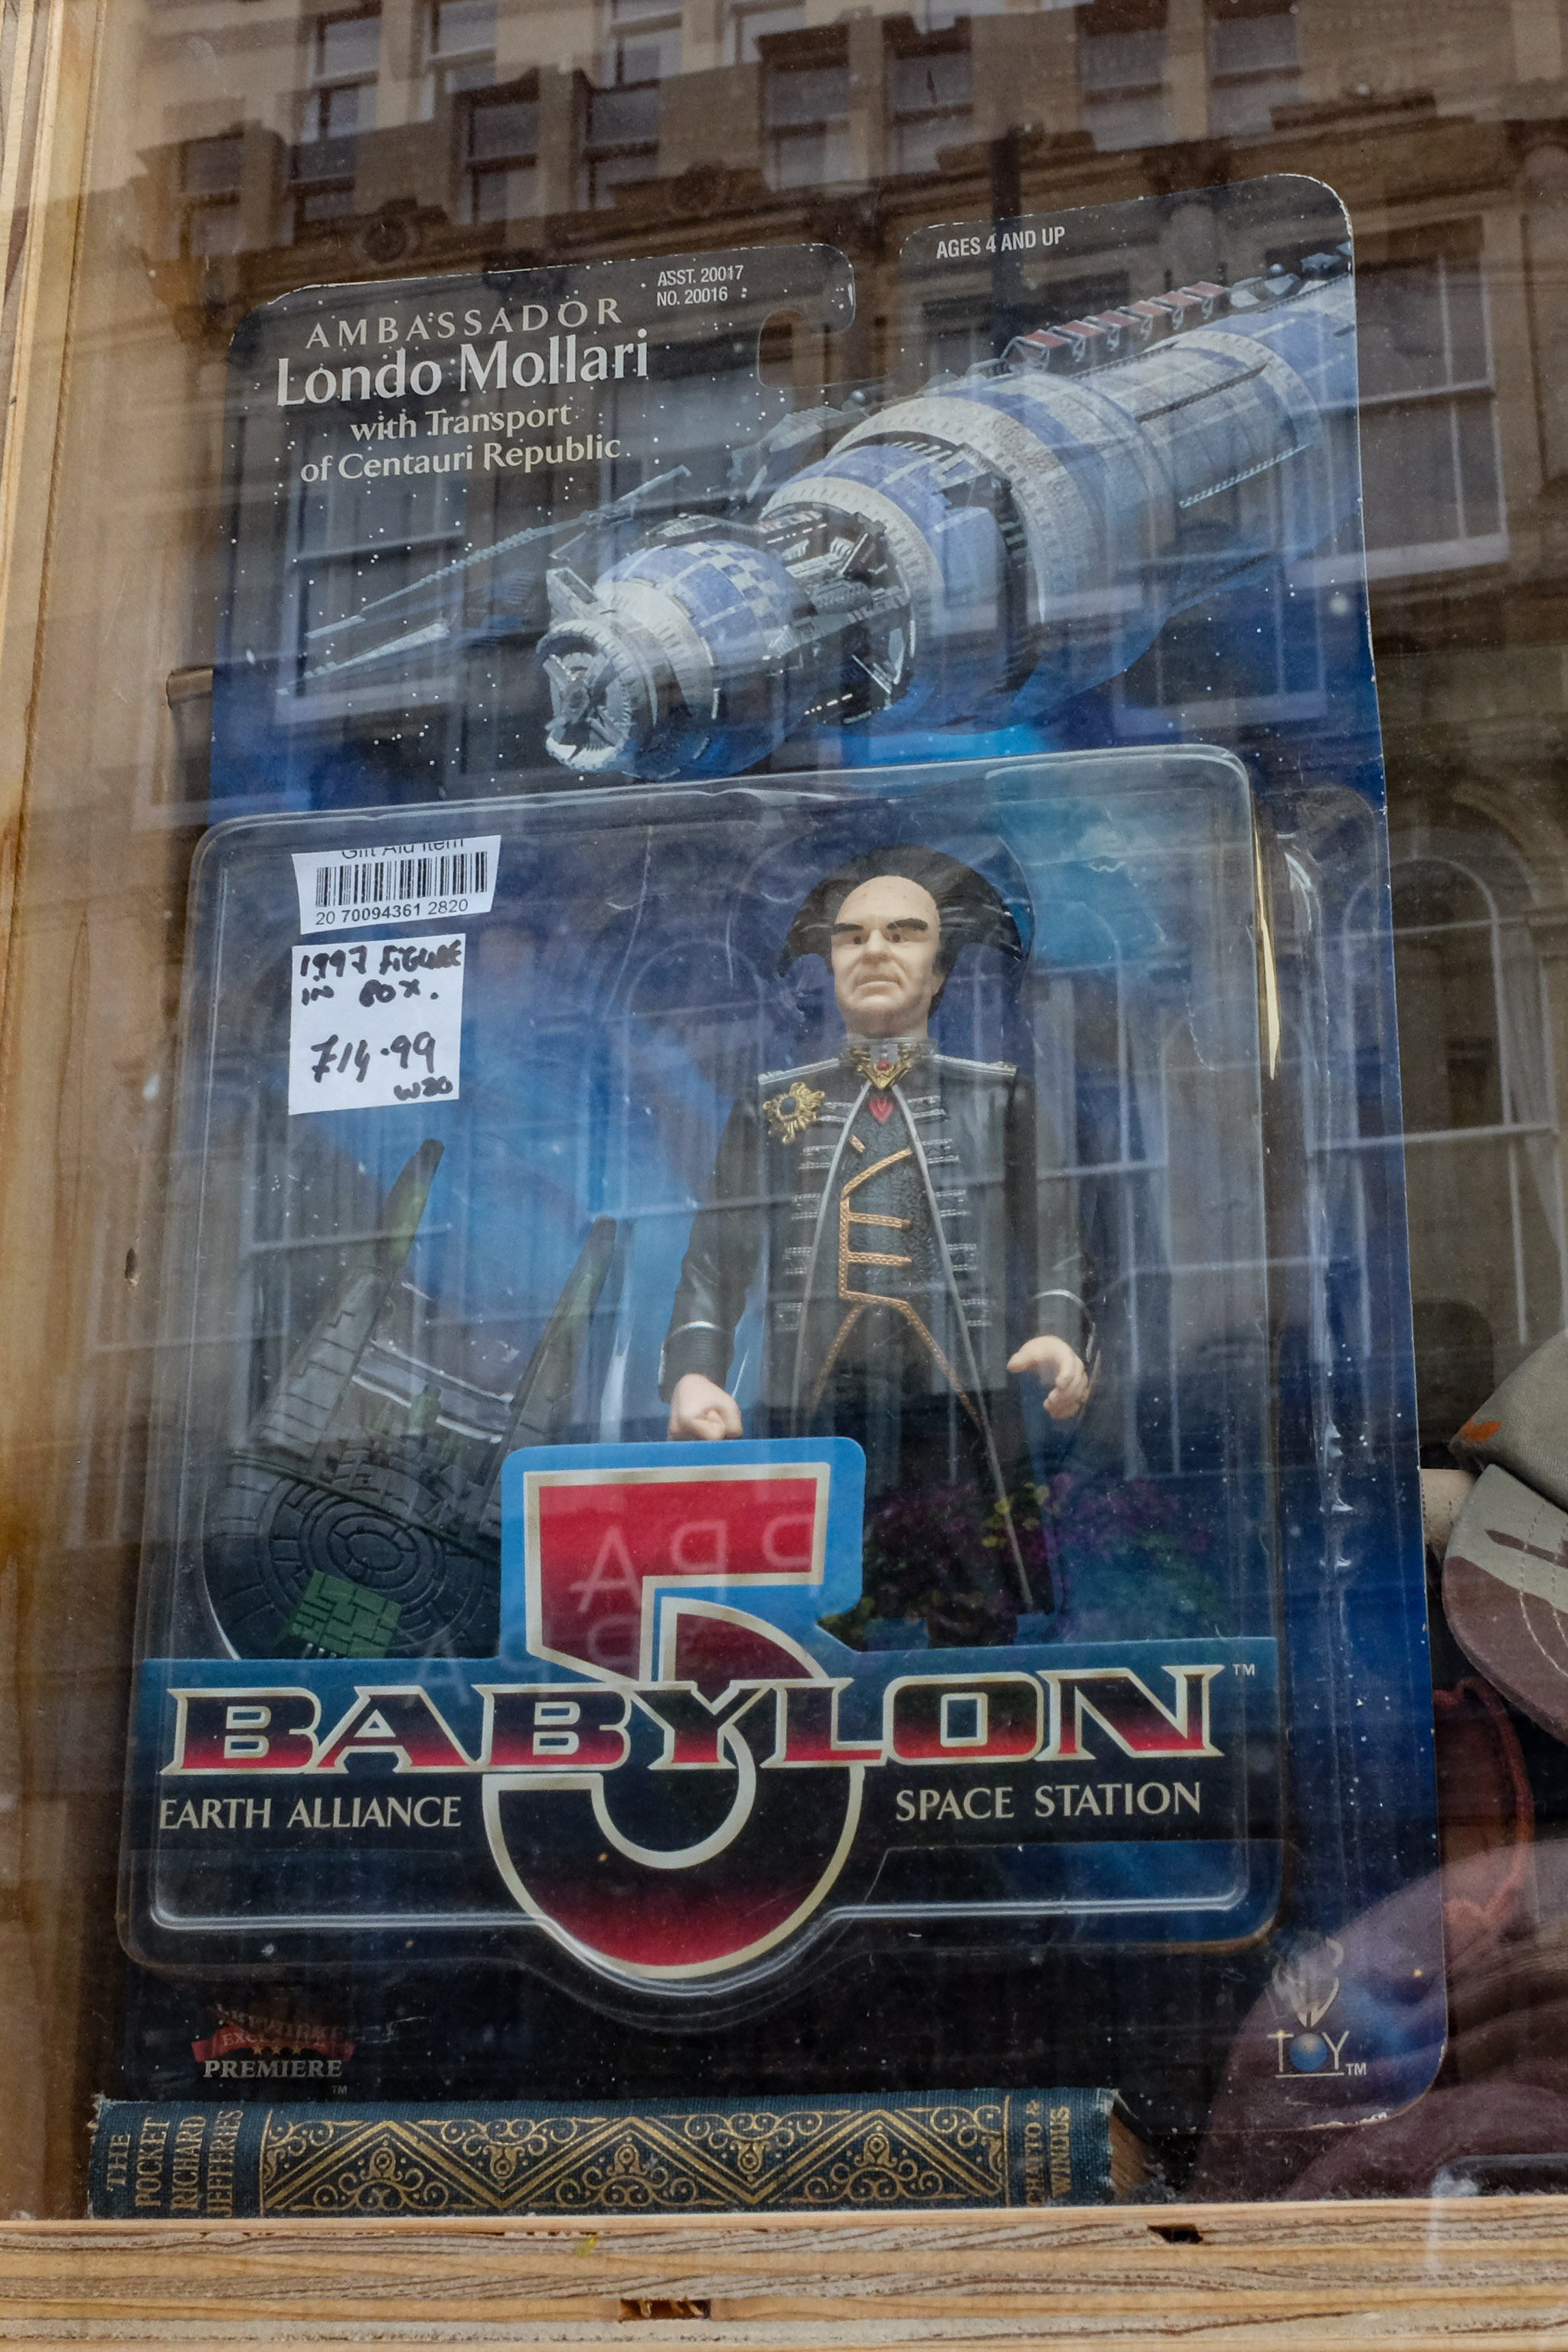 Oxfam
A random reminder of a TV show of my youth: Londo Mollari, the Centauri Ambassador to Babylon 5. Spotted in the window of the Oxfam shop on Victori...